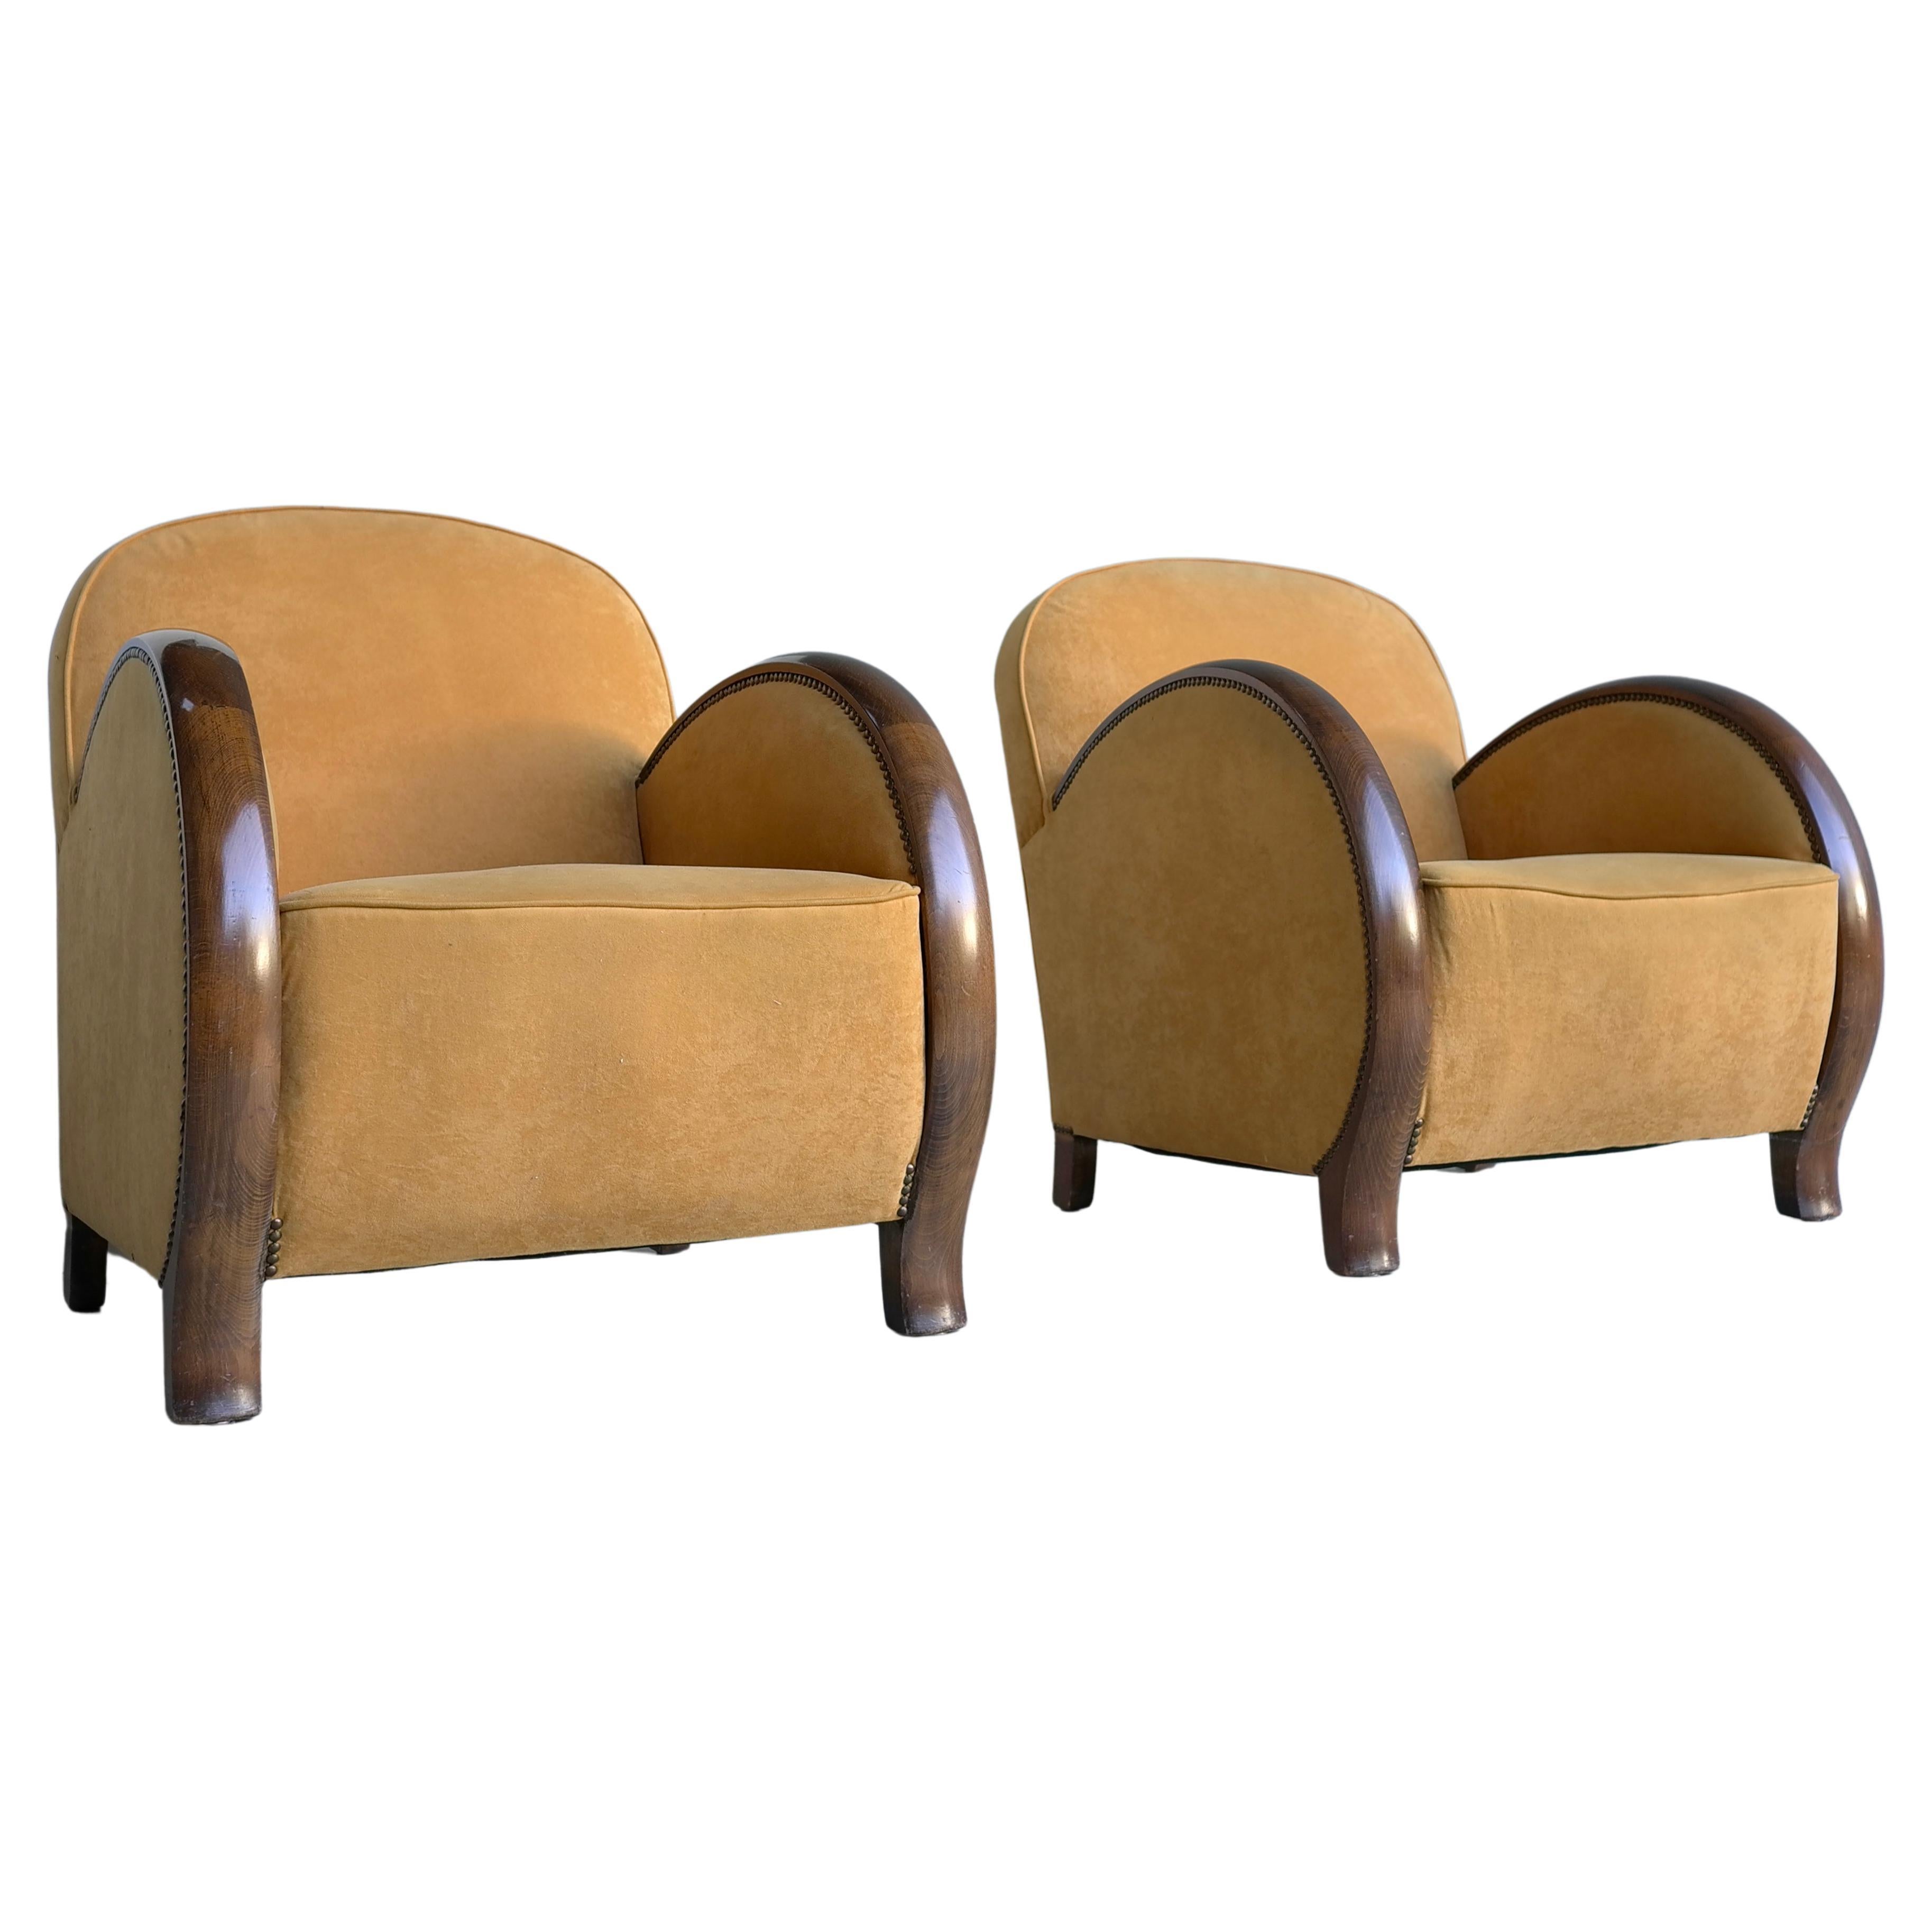 French Pair of Art Deco Streamlined Armchairs in yellow Velvet with Wooden arms 1930's For Sale